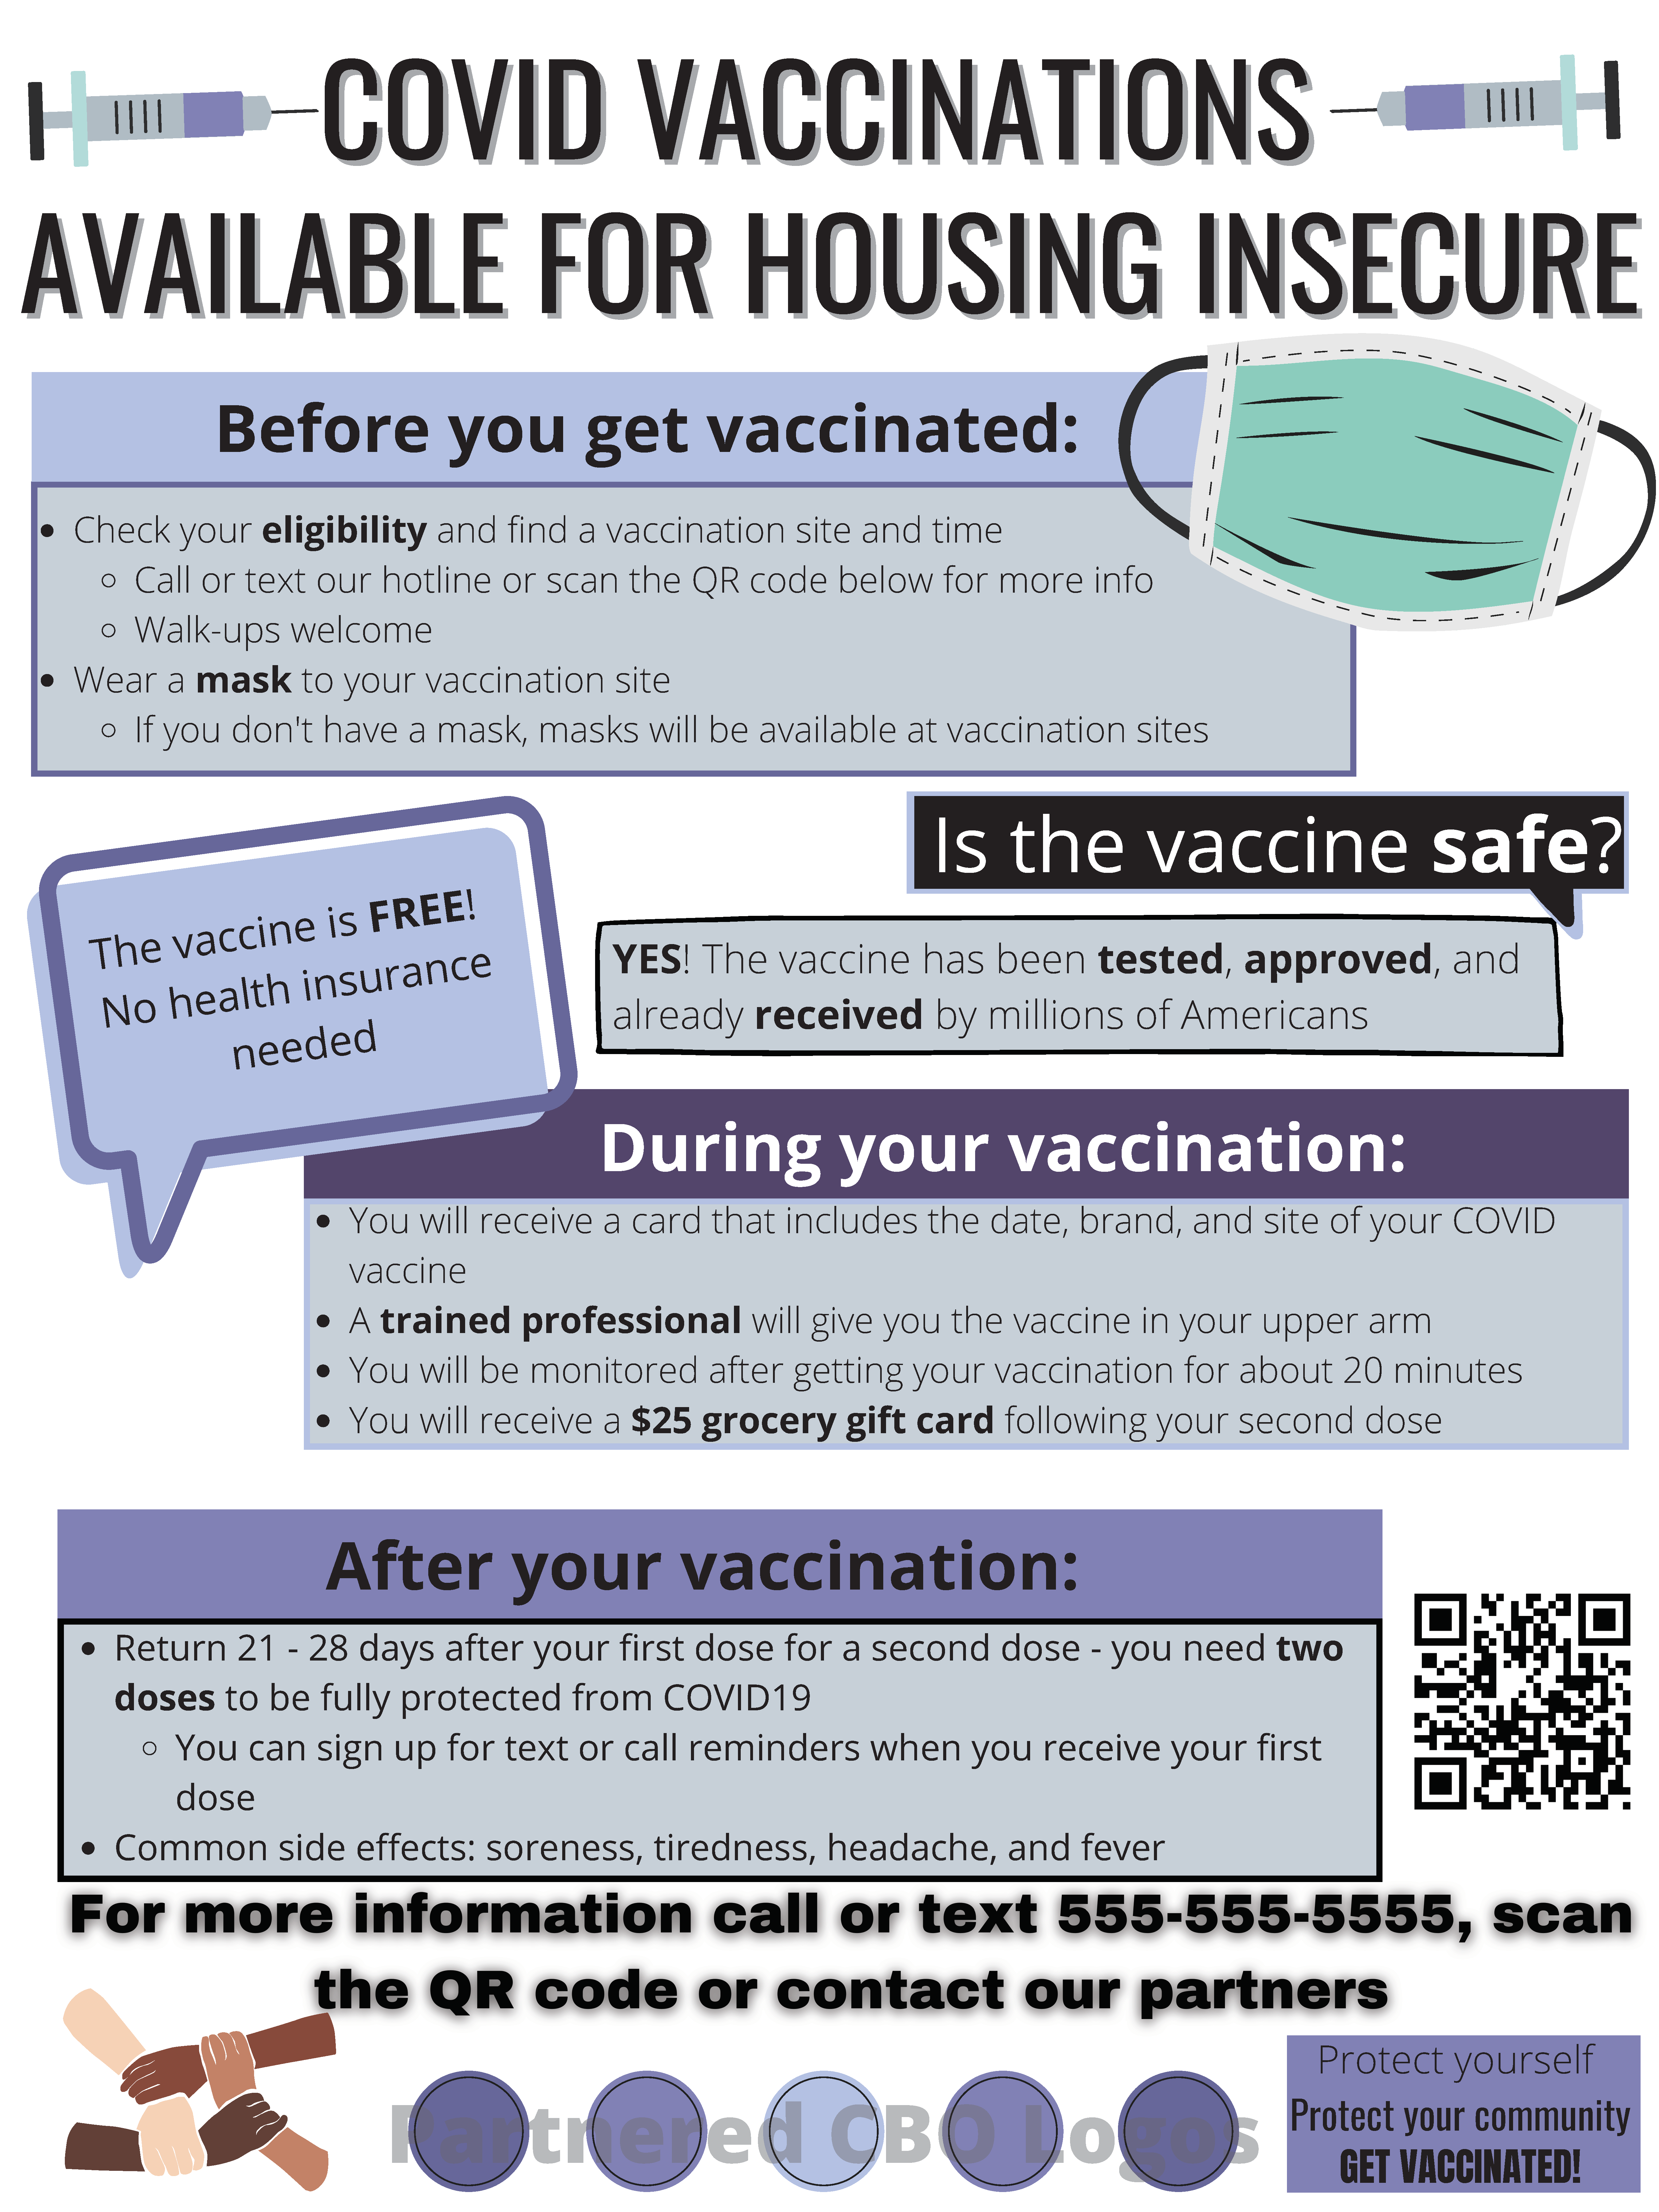 COVID vaccinations available for housing insecure